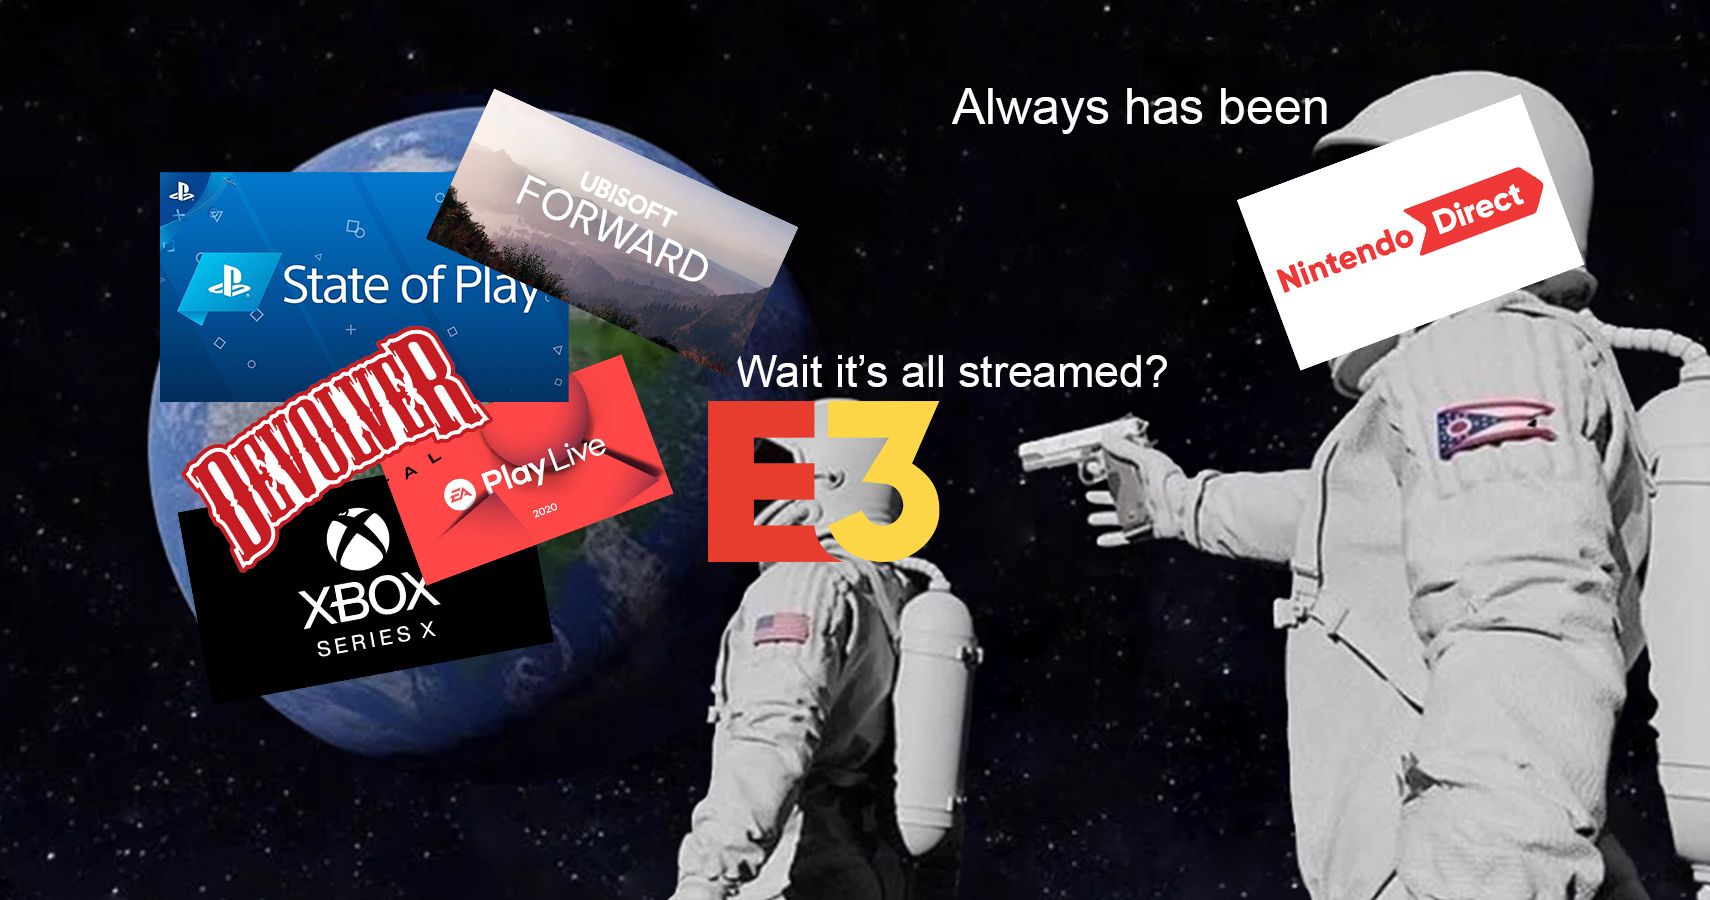 What Are E3s Plans To Stay Relevant